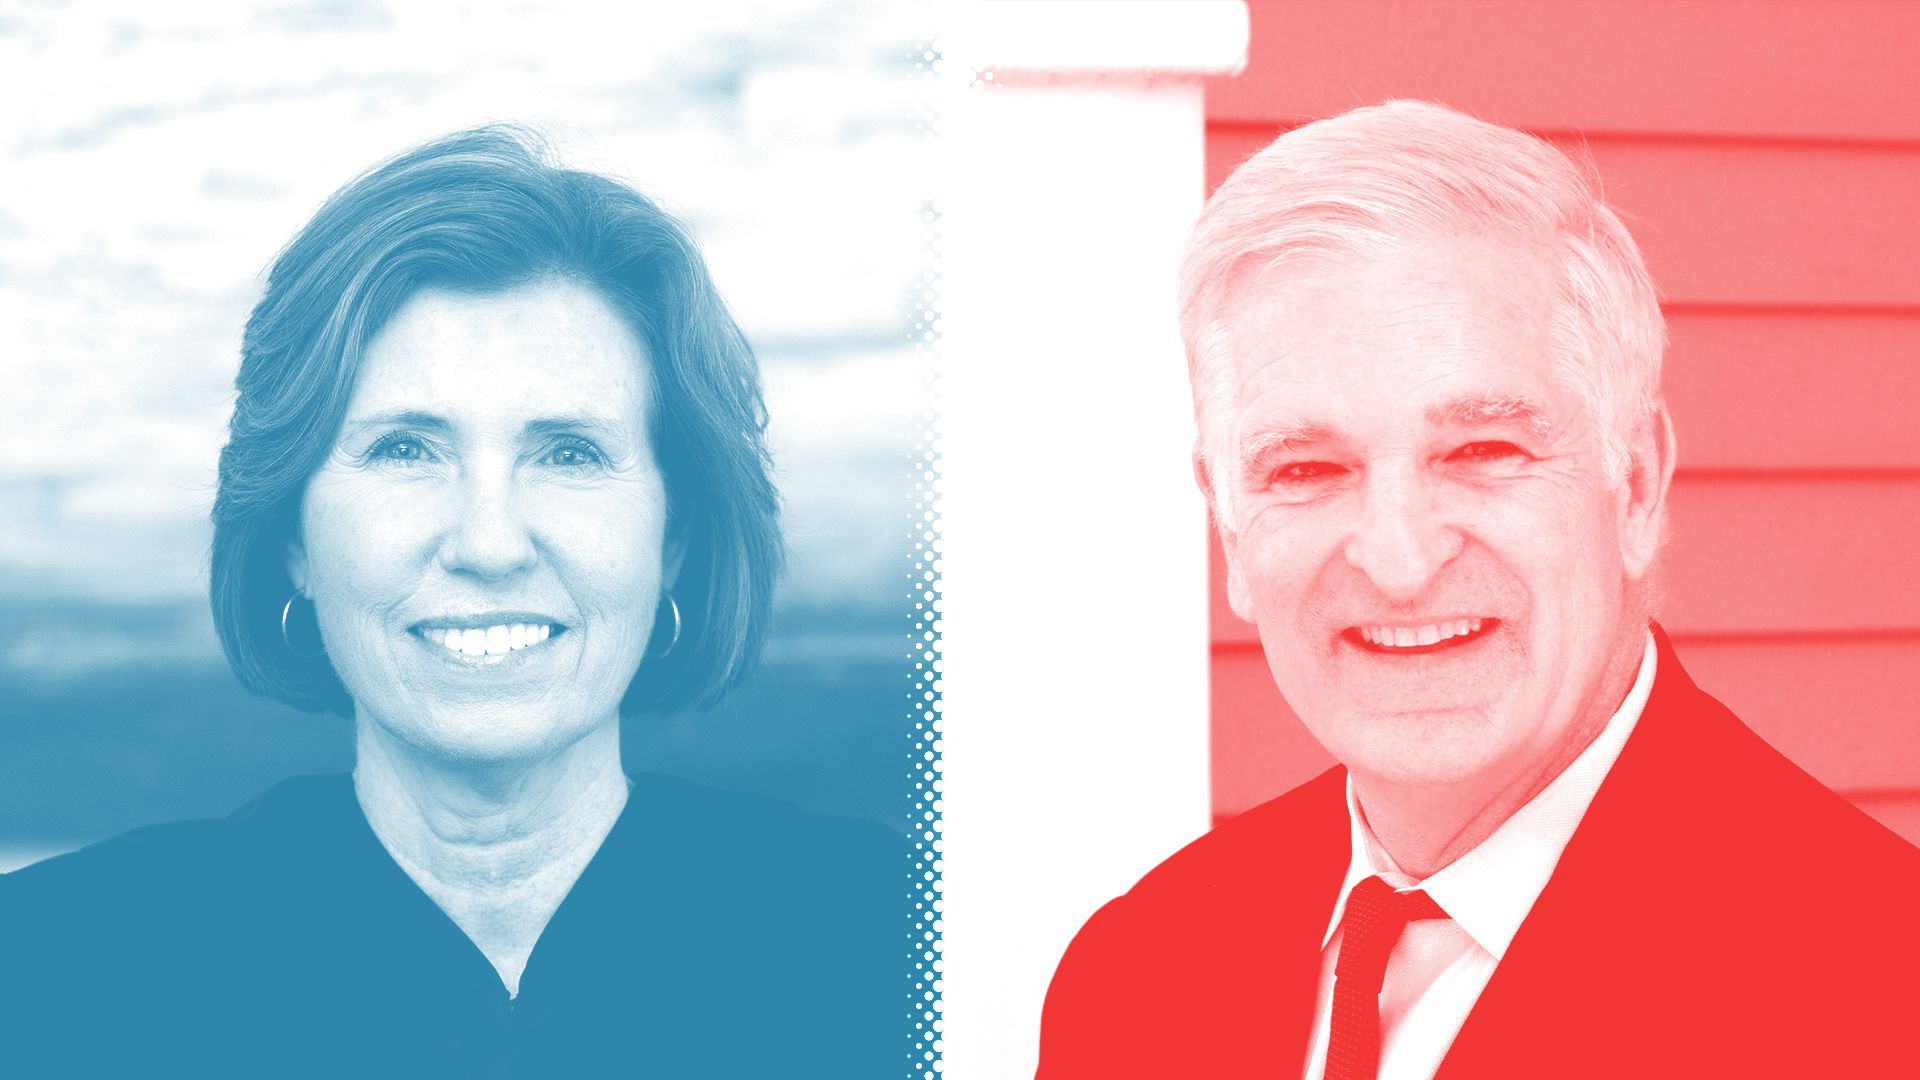 Photo illustration of Elizabeth Rochford, tinted blue, and Mark Curran, tinted red, separated by a white halftone divider.